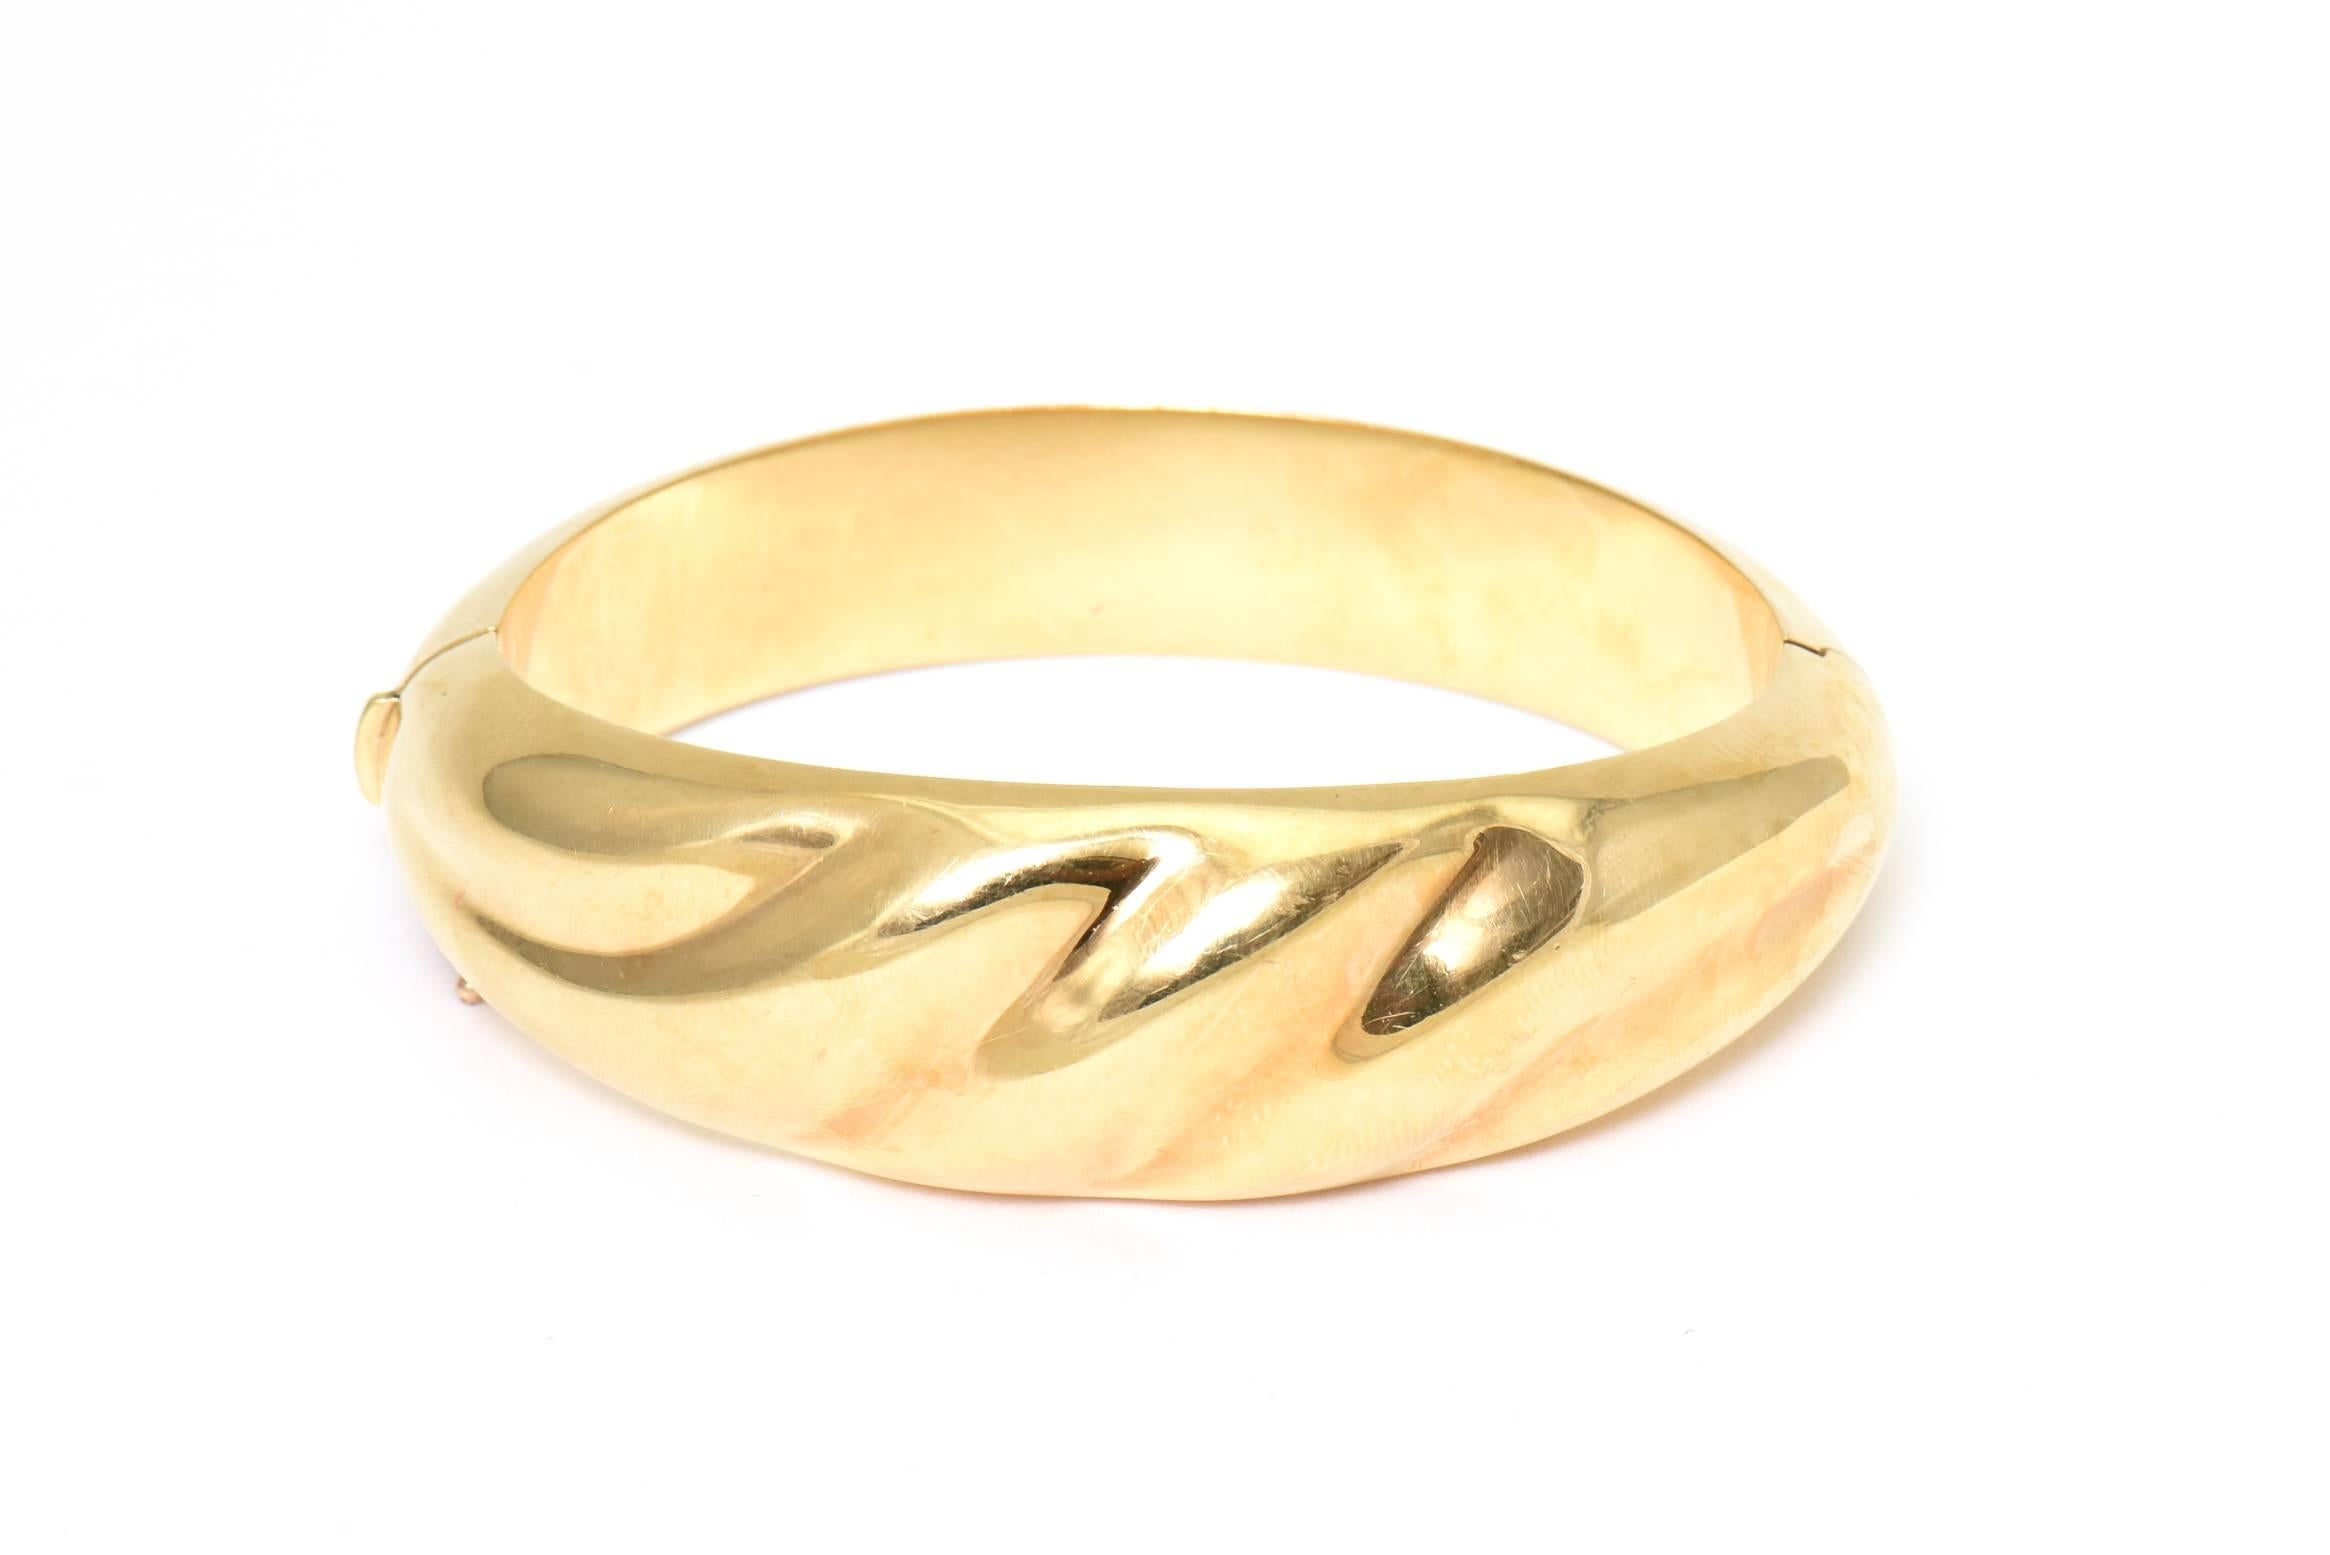 1970s Hinged 18k yellow gold bangle bracelet with a 3 dimensional wave design.  This bracelet was cast in Italy.  It has a push button clasp as well as a figure 8 safety.

Interior circumference 6.5